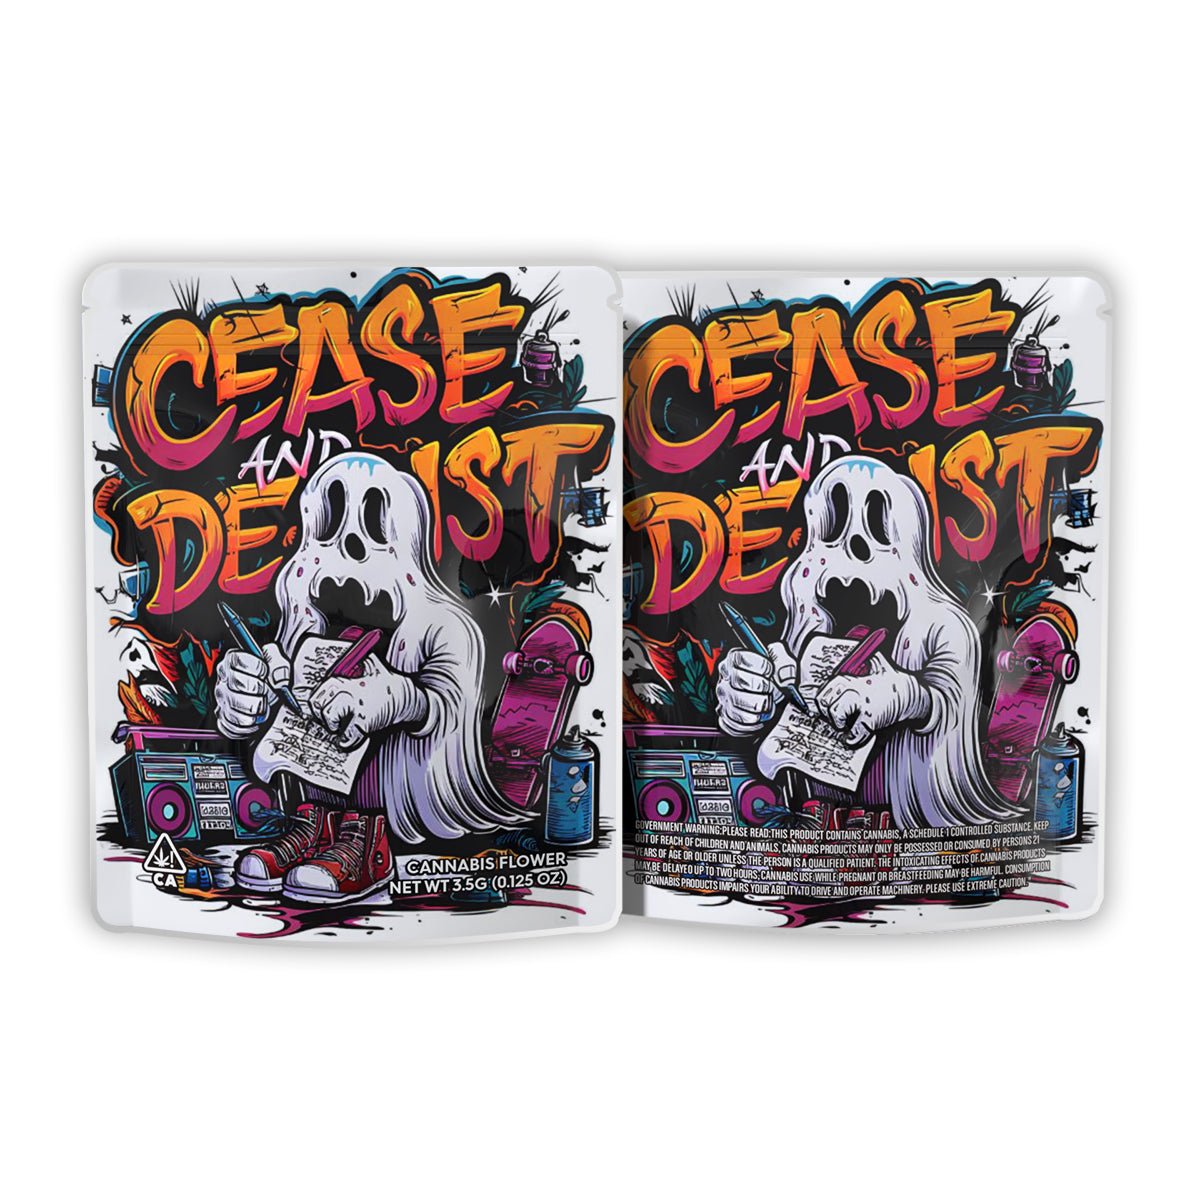 Cease and Deist Weed Mylar Bags 3.5 Grams